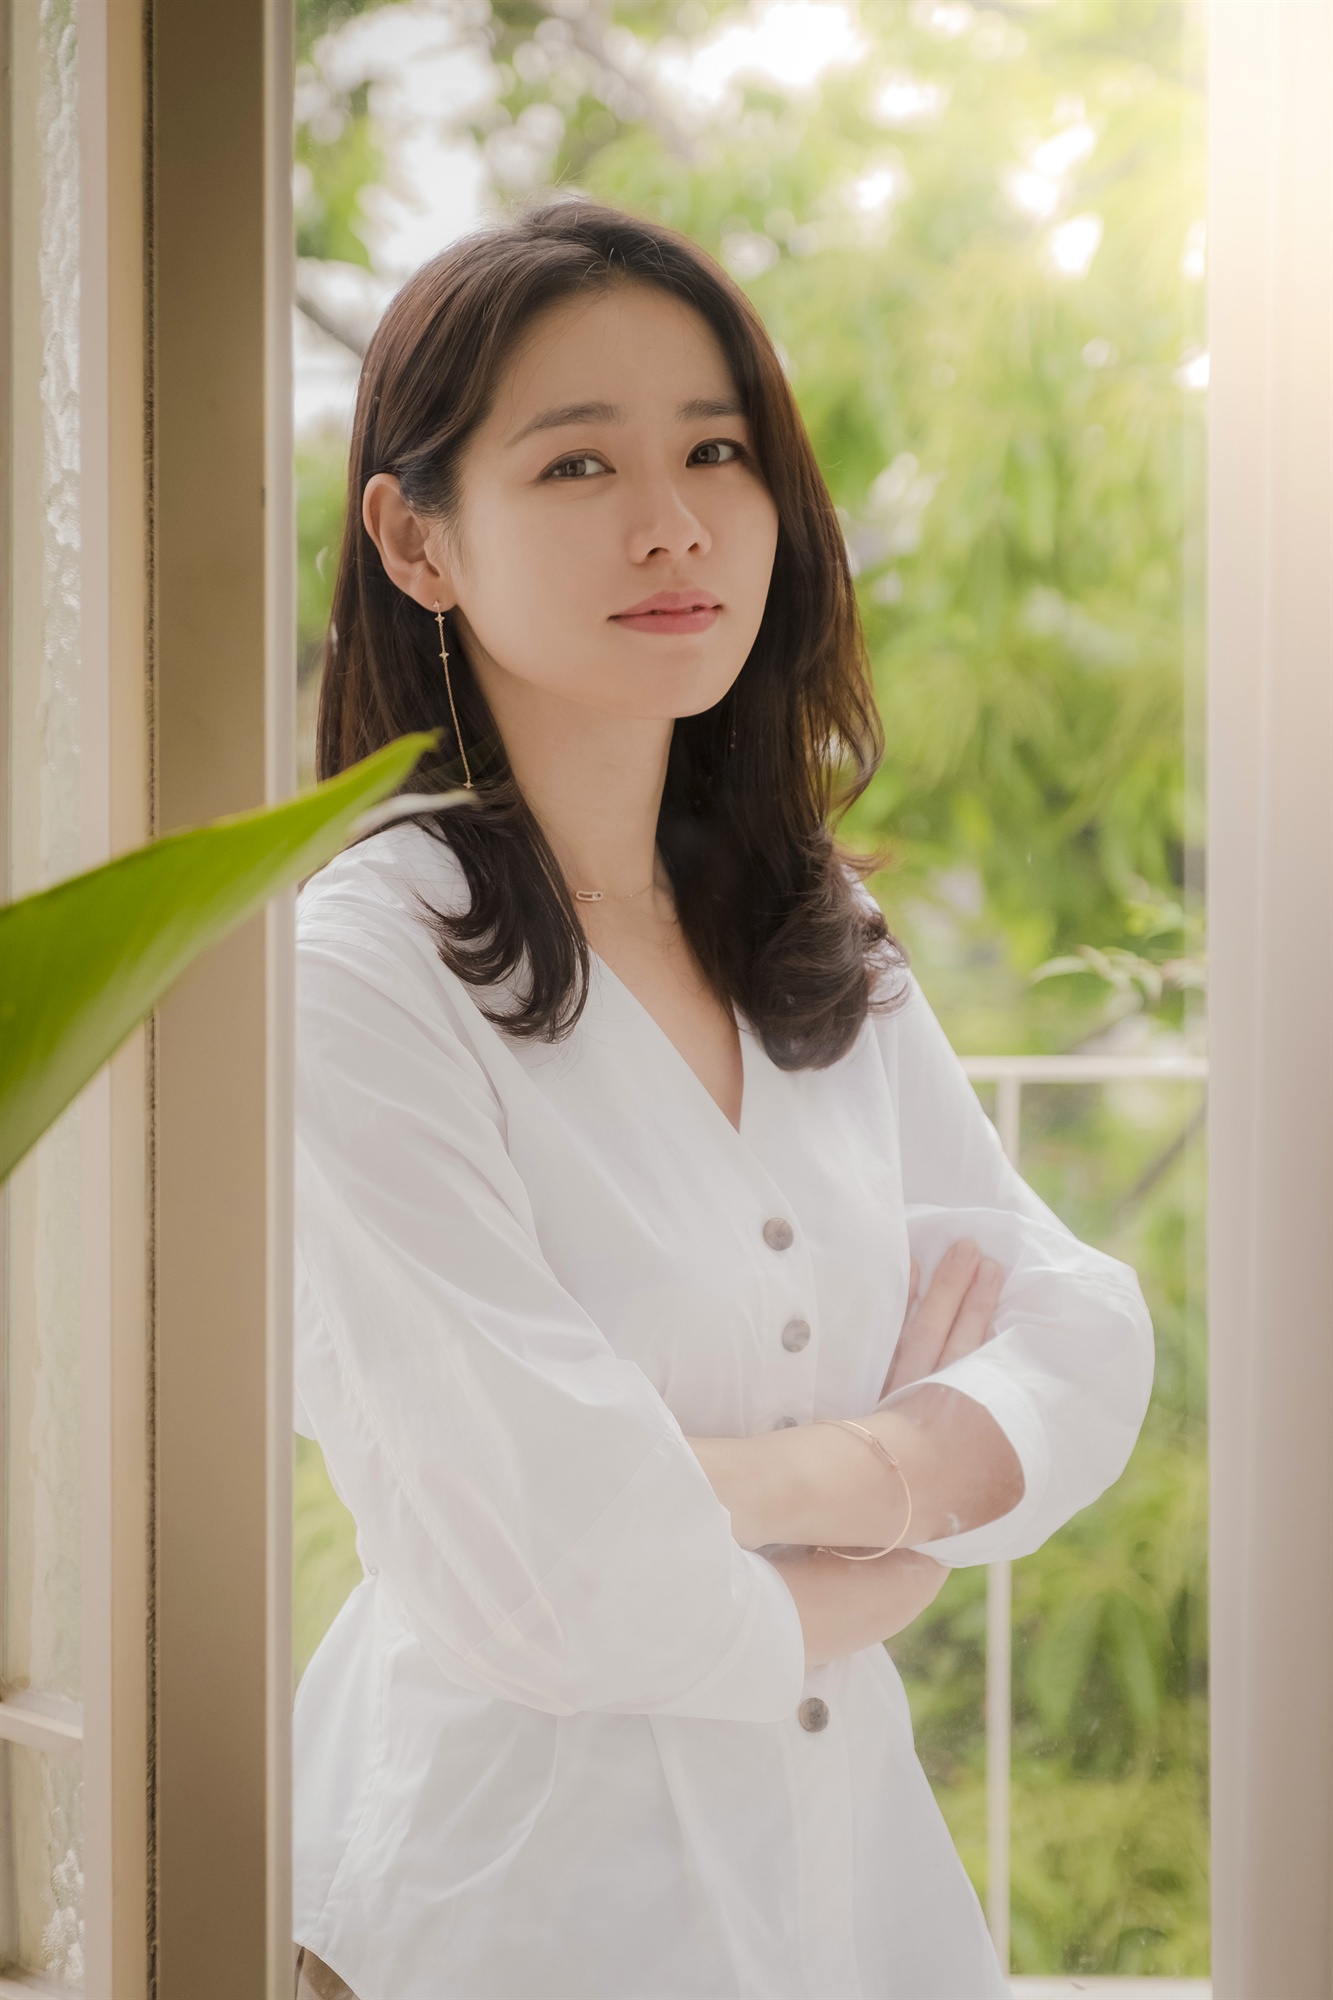 Many viewers complained when the early Jin-ah (Son Ye-jin) of JTBCs Bob-Savoury Sister and Jun-hee (Jeong Hae-in)s Pumpy and Al-Kong-dal-kong love god ended too soon.One of the biggest complaints of viewers, especially, was the frustration of the character Jin-ah.In fact, Im not quite sure what the character Jin-a is like, as the person (laughing) Son Ye-jin is not yet familiar with Son Ye-jin.Jina seems to be a good Savoie person, and Jina was the one who did not want to hurt anyone even though Jinas Choices may have hurt someone.Jina doesnt talk candidly, though she would have been more comfortable to be honest. The characters weve seen grow rapidly through pain.Thats what we want to see, but Im not sure if one person actually grows so big, living and loving.I thought it was human to repeat the same mistake. Jina is a person who has been growing for 16 parts. Maybe she came back from Jeju Island and became harder?I think (the director and the writer) wanted to talk about love ending without clearly recognizing the end of love; usually the works show more clearly.This is why it hurts, it hurts, and it finally breaks up. It is so concrete that Junhee and Jina are over without knowing when to end.When we love and break up, the day we said Lets break up isnt the day we broke up soon - the cracks are starting, and this Drama showed it well.I did not fall in love with the other person, but it felt very sick and realistic to end up doing different Choices. Jinah is real... so sad.- The reason for unrealistic was controversial because Jin-ah was kneeling. It is said that it is true to kneel down to allow love in front of parents.One of your acquaintances is a woman in her mid-thirties who said she was crying when she tried to speak out in front of her parents while she was dating against the opposition of the family.I thought it would be a good story. Jina could not shed tears. - Eventually, many viewers expressed regret at the end of the resignation. Yes. The reality is so. I was so sad to hear that story.Legally, it takes years for the workplace and Victims to fight, and in the meantime Victims often collapses.The director said, Jinah lasted for this time. It is hard to tell how painful the moment Jina went to resign was.- There is a change in Son Ye-jin as he Acts the character Yoon Jin-ah. The visibility has become wider.The character in the drama throws the ambassador, but I want to let the viewers know that there are various situations, not just the ambassador, and I want to express it as an actor.But Jina had many points that she could not express, and there were situations where she could not talk about it, and she seemed to have had a new experience when she met Jina. - Son Ye-jin seems to be having similar troubles with Jin-ah when he looks at Jin-ah. What do you think when Son Ye-jin looks at Jin-ah?Im a lot of Savoie honest, so even if your opponent is hurt, Im honest. Honestness may be selfish, but it can be an advantage.On the other hand, Jina is a swallower, so it is not until 16 times that Junhee tells his story, Do you know how I lived?There were moments when that was salty and in some ways I wanted to do these Choices too.- Son Ye-jin said that he was honest, and Jin-a said he swallowed. But did Jin-ah take the hand of Jun-hee under the table first?The scene was an improvisational ad-lib: Savoie is rare when a director gives specific instructions on the spot; the action line is tailored naturally according to the circumstances.I didnt think of it at home, and when I came to the scene, I grabbed my hand and drank bottled beer. I dont think Id actually be able to Oh! What if the other person shakes it off.Acting is risking his life.- Director Ahn Pan-seok once compared Son Ye-jins Acting to Muhammad Ali, saying that the scene coming to the filming scene to act is like a boxer on the ring. (laughing) actors will have different ways of mind control, each one of them might say, Where is that? but I sometimes want to say, Am I too spooky?Its funny and amazing when you talk about it. When I take an important god, I wash my hands in the bathroom and think about it.I feel what it will be like to disinfect my hands before the surgeons do the surgery, and when I wash my hands and go to the scene soon, I have to take the god.No one helps me on the spot. I have to fight alone, thoroughly and alone. I was always surprised that the coach had said it.When Im on Acting, I feel like Im risking my life in a way, this is all I really am, so I try hard, it happens: Lets work hard!Its not, its making you work hard.- The first criterion for Choicesing scenario is also new? Yes. I did not try.Even if it is the same genre, I want to continue to do stories that I have not done, characters that I have not dealt with. - Son Ye-jin has a equation called Meloquin. What do you think of it? I think Ive done melodies for a long time.The orthodox melodrama, which was the first time since the Eraser in My Head, had been more than a decade and had recently been the melodrama of Shark, but Shark was a Drama that showed more different things (than Melo).I felt like I had taken a melodrama for a long time, and then I did this drama. Later, I would like to shoot movies like The Bridge of Madison County and Hwa Yang Yeonhwa.Acting risked his life... and no ones helping me.